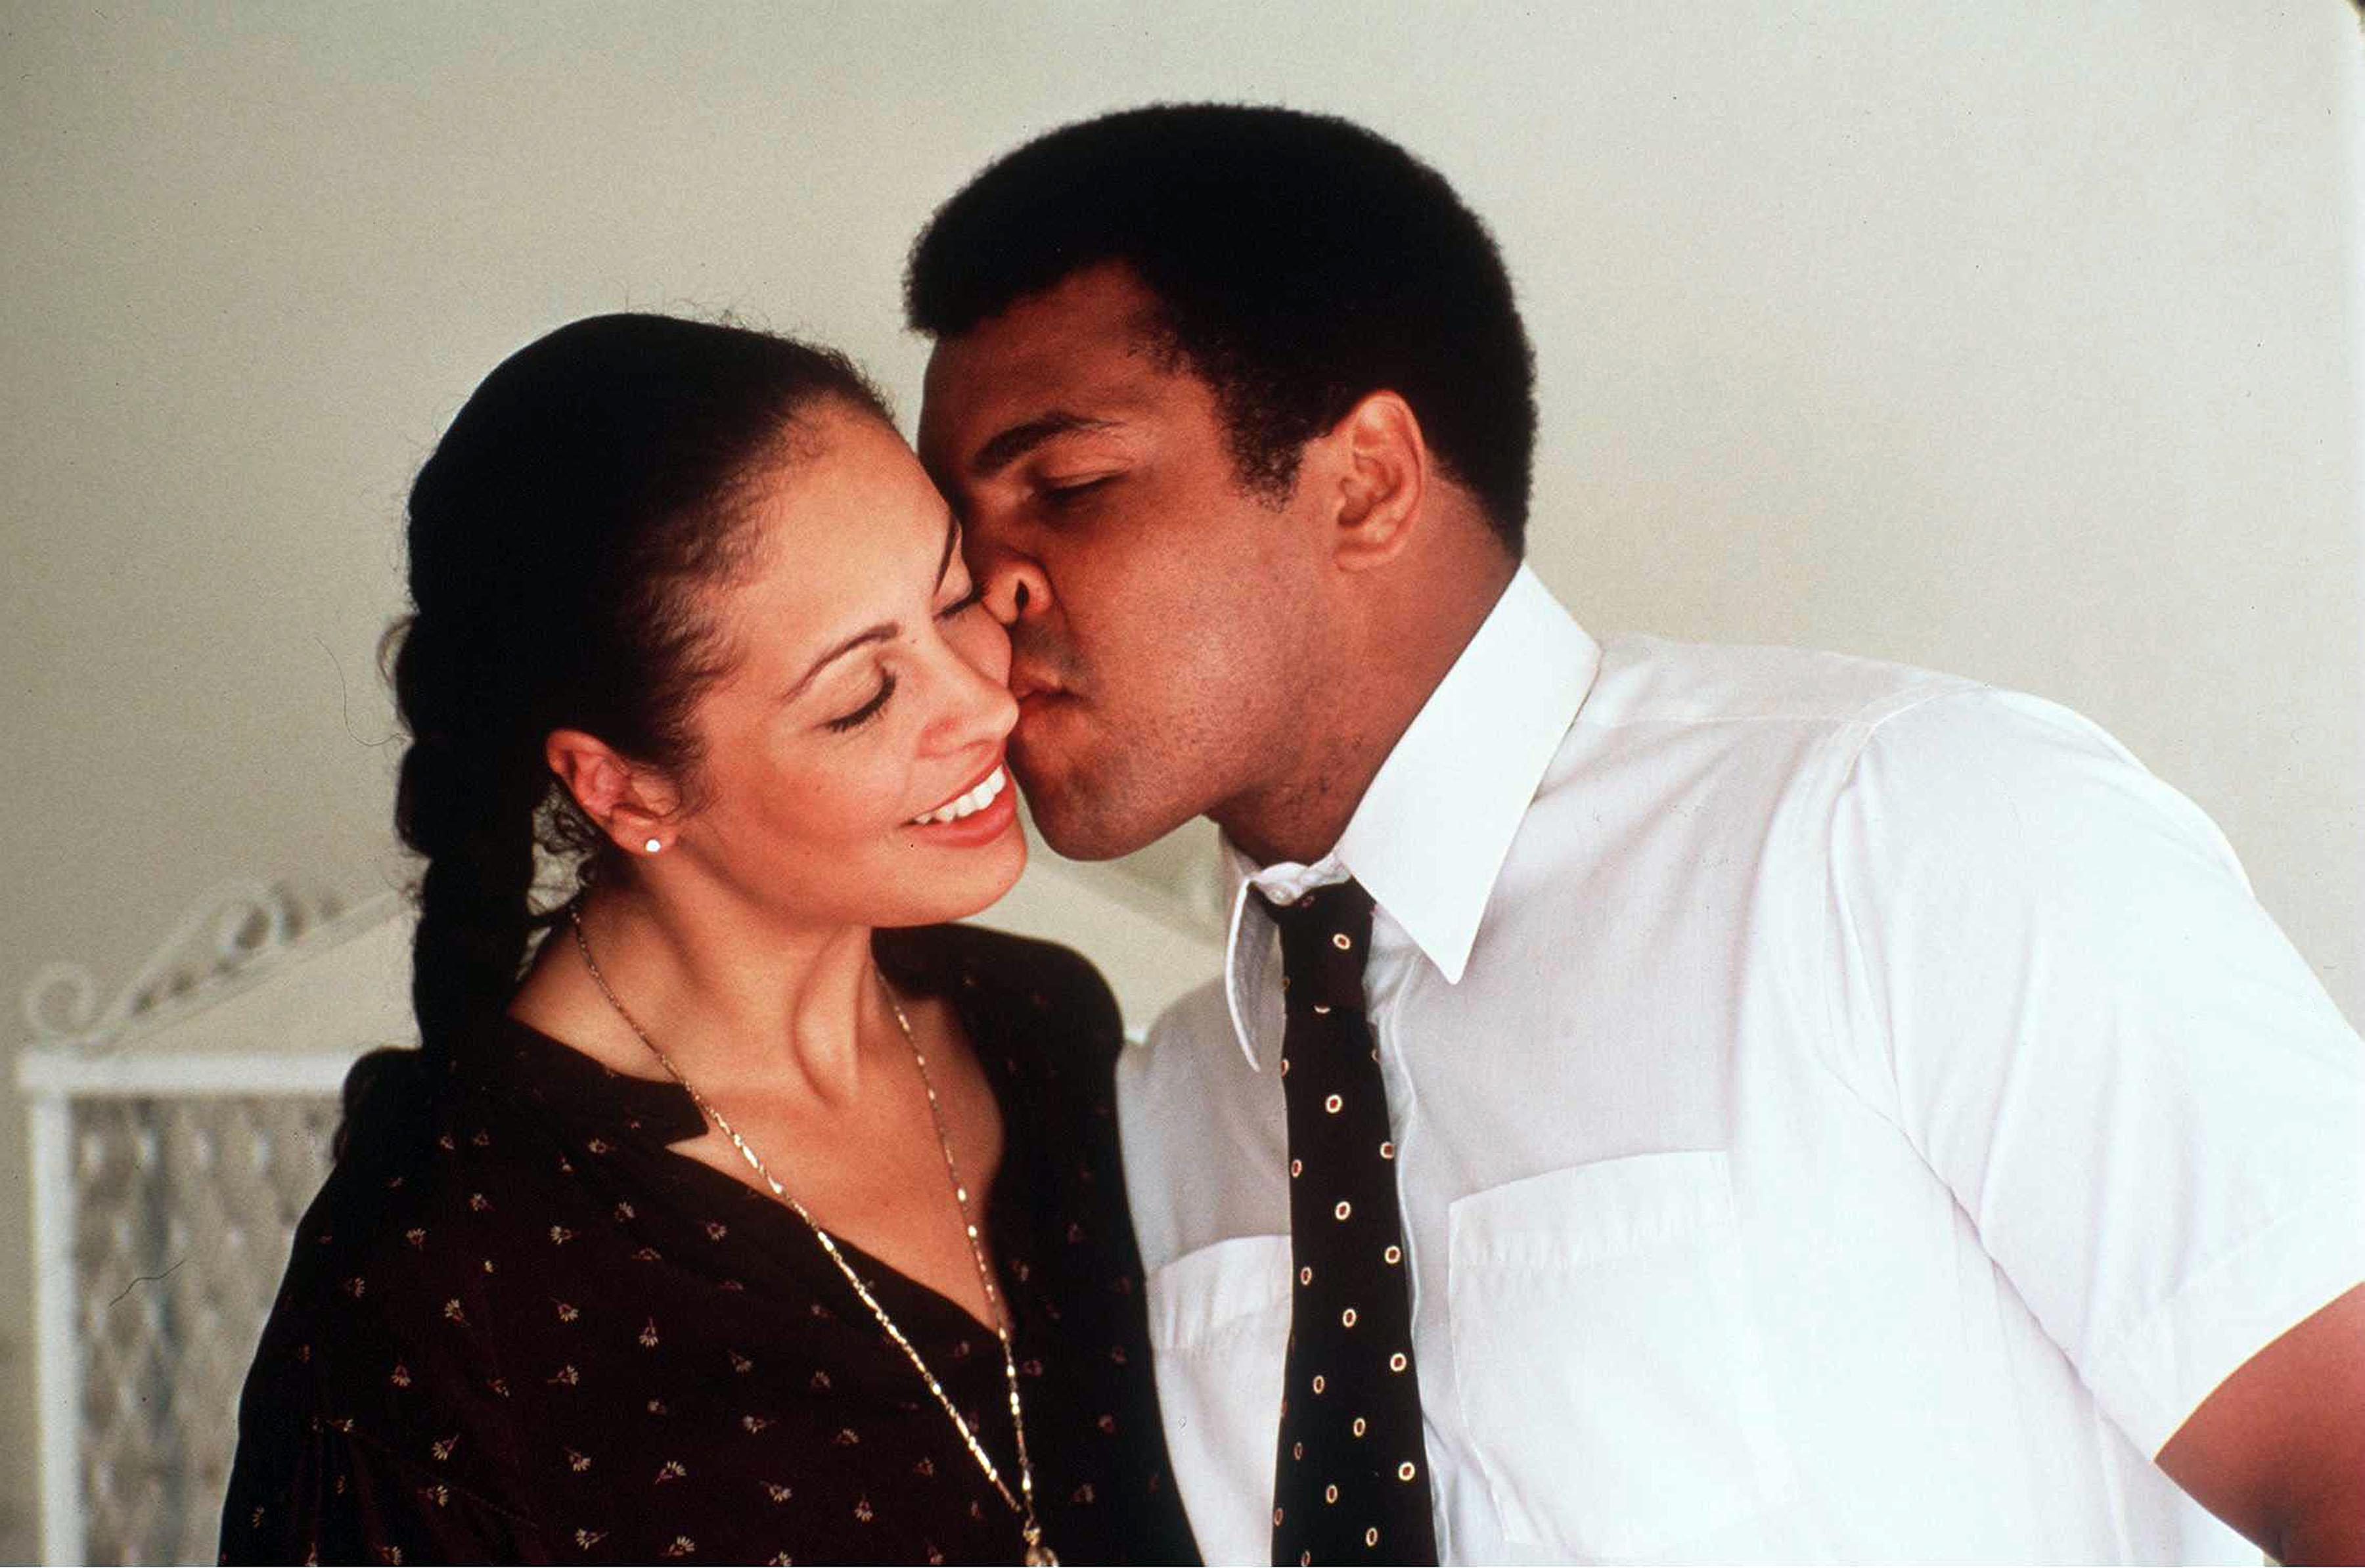 3113 LOS ANGELES CALIFORNIA May 3, 1980 Muhammad Ali and his third wife Veronica Porsche in their Hancock Park home before his last fight with Larry Holmes which took place in Las Vegas, 2nd October 1980., Image: 288875236, License: Rights-managed, Restrictions: , Model Release: no, Credit line: Profimedia, Pacific coast news